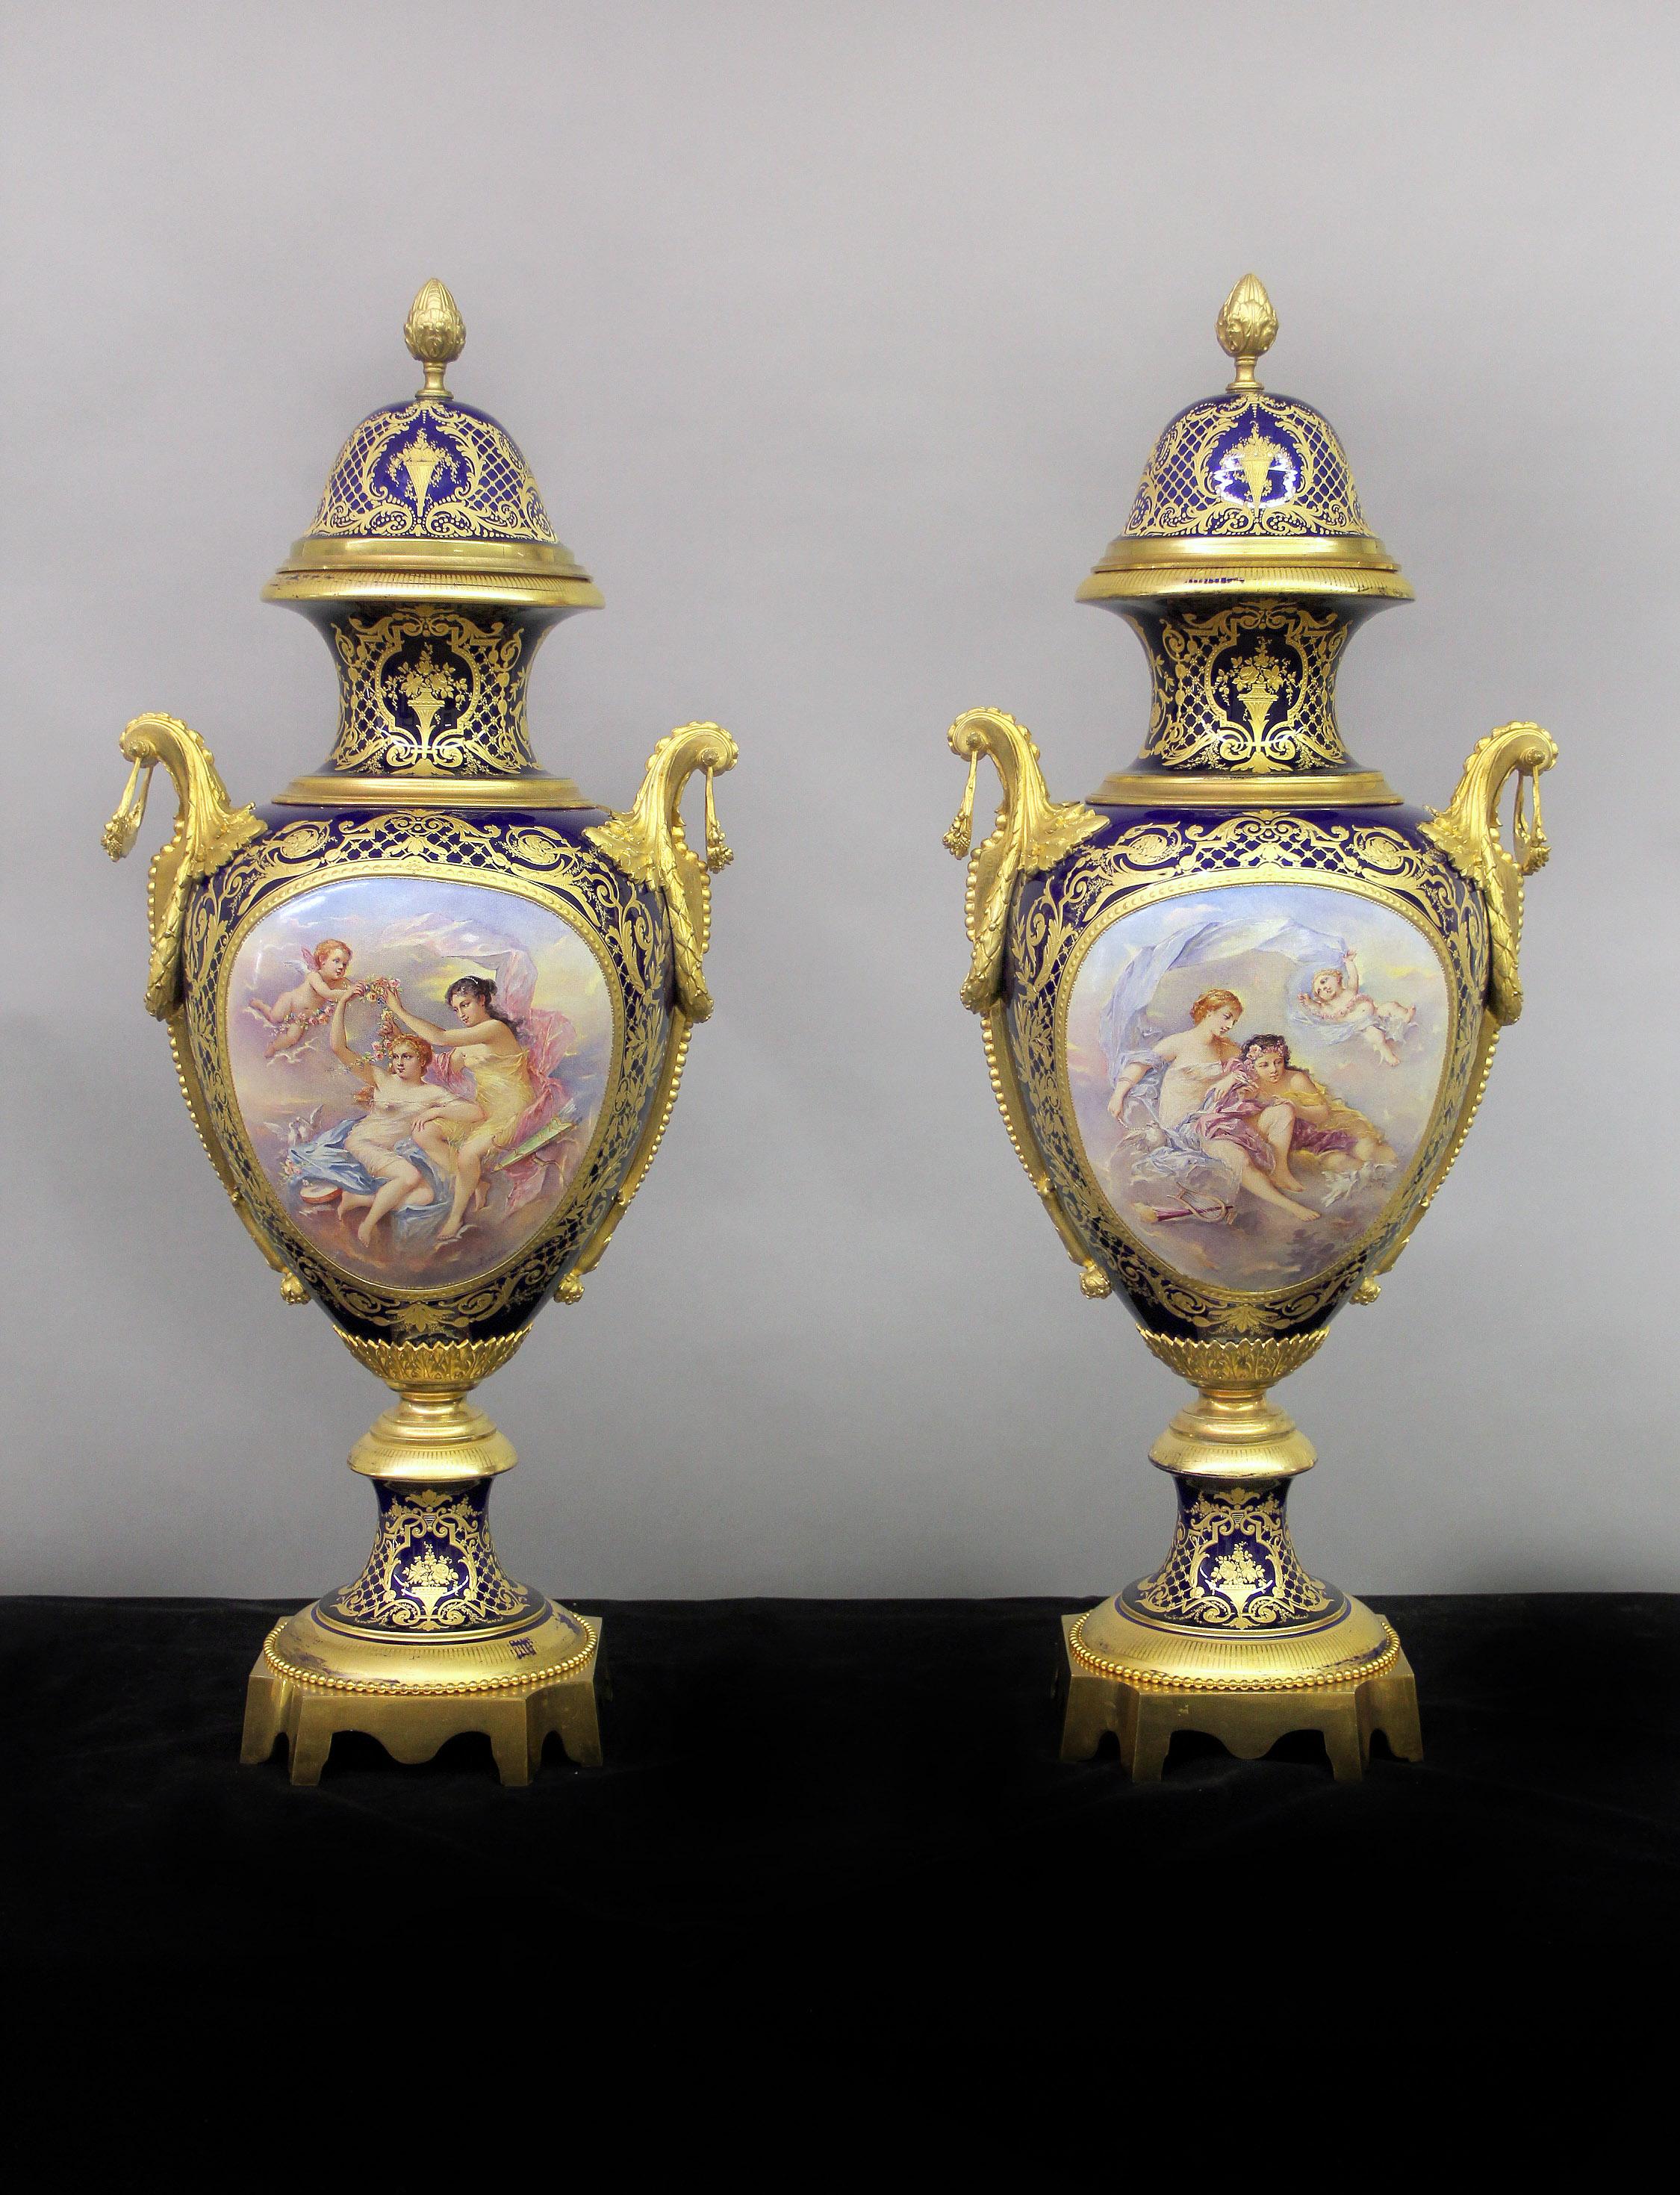 A spectacular set of late 19th century gilt bronze mounted Sèvres style vases and pedestals.

The vases of baluster form, the domed covers surmounted by a pinecone finial, the front with painted scenes of women and cherubs, the reverse with